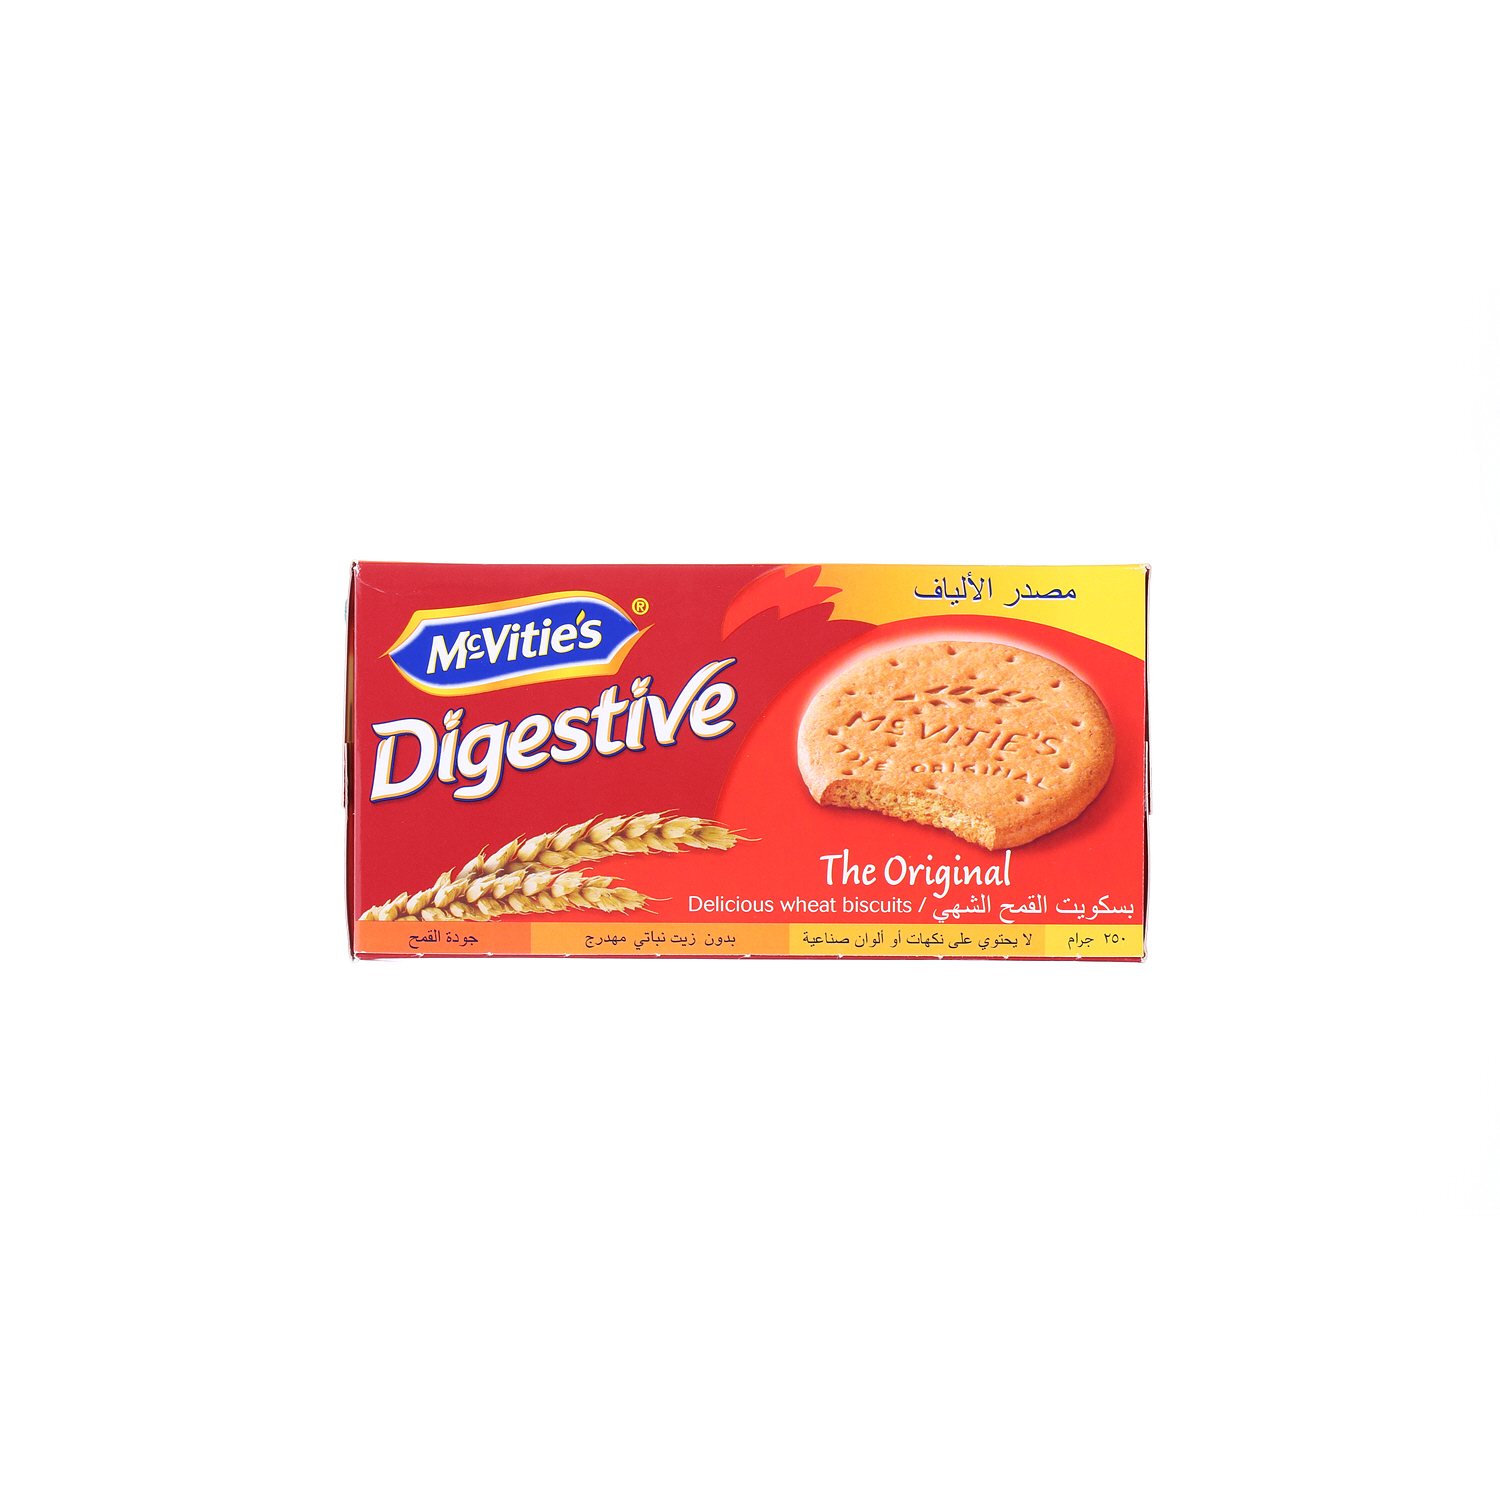 Mcvities Digestive Biscuits 250 g